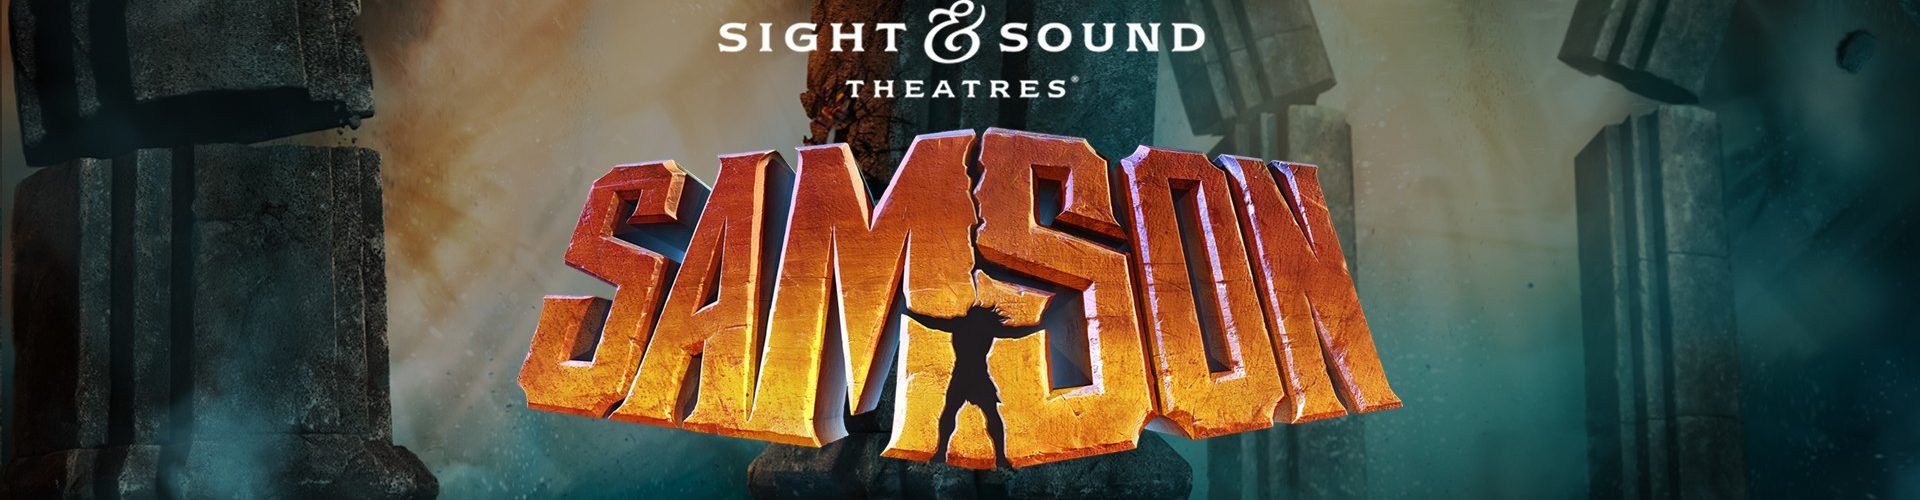 Samson is now open at Sight & Sound Theatre in Branson!